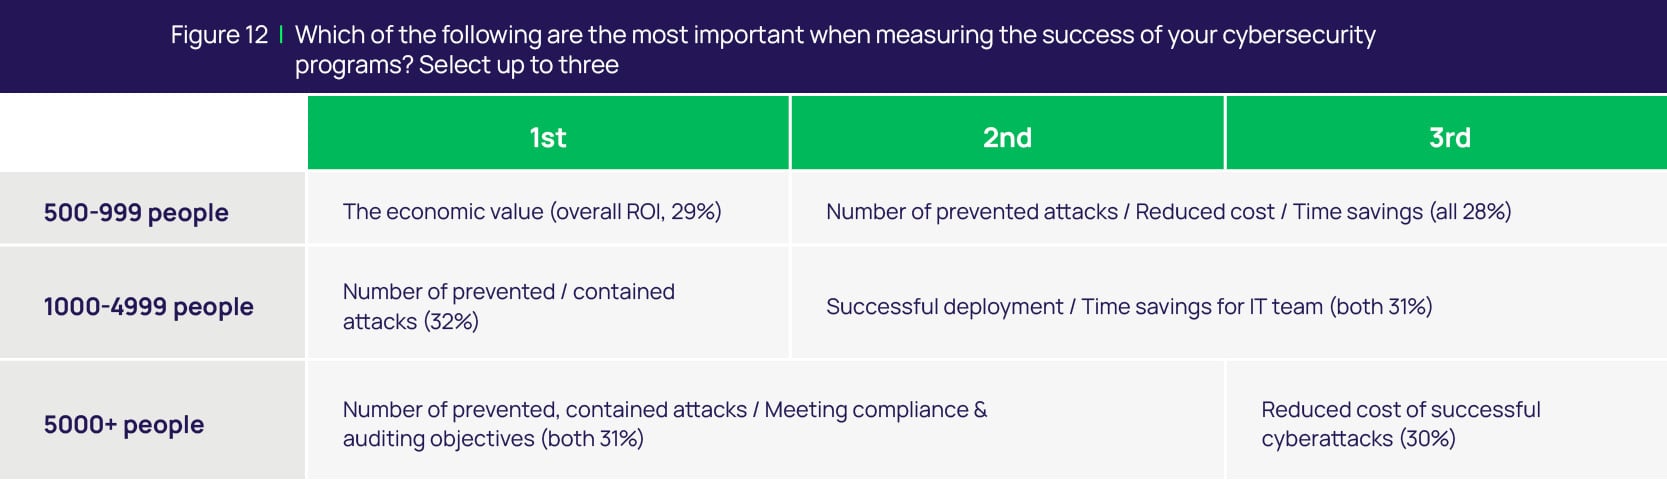 Which are the most important when measuring the success of your cybersecurity programs?